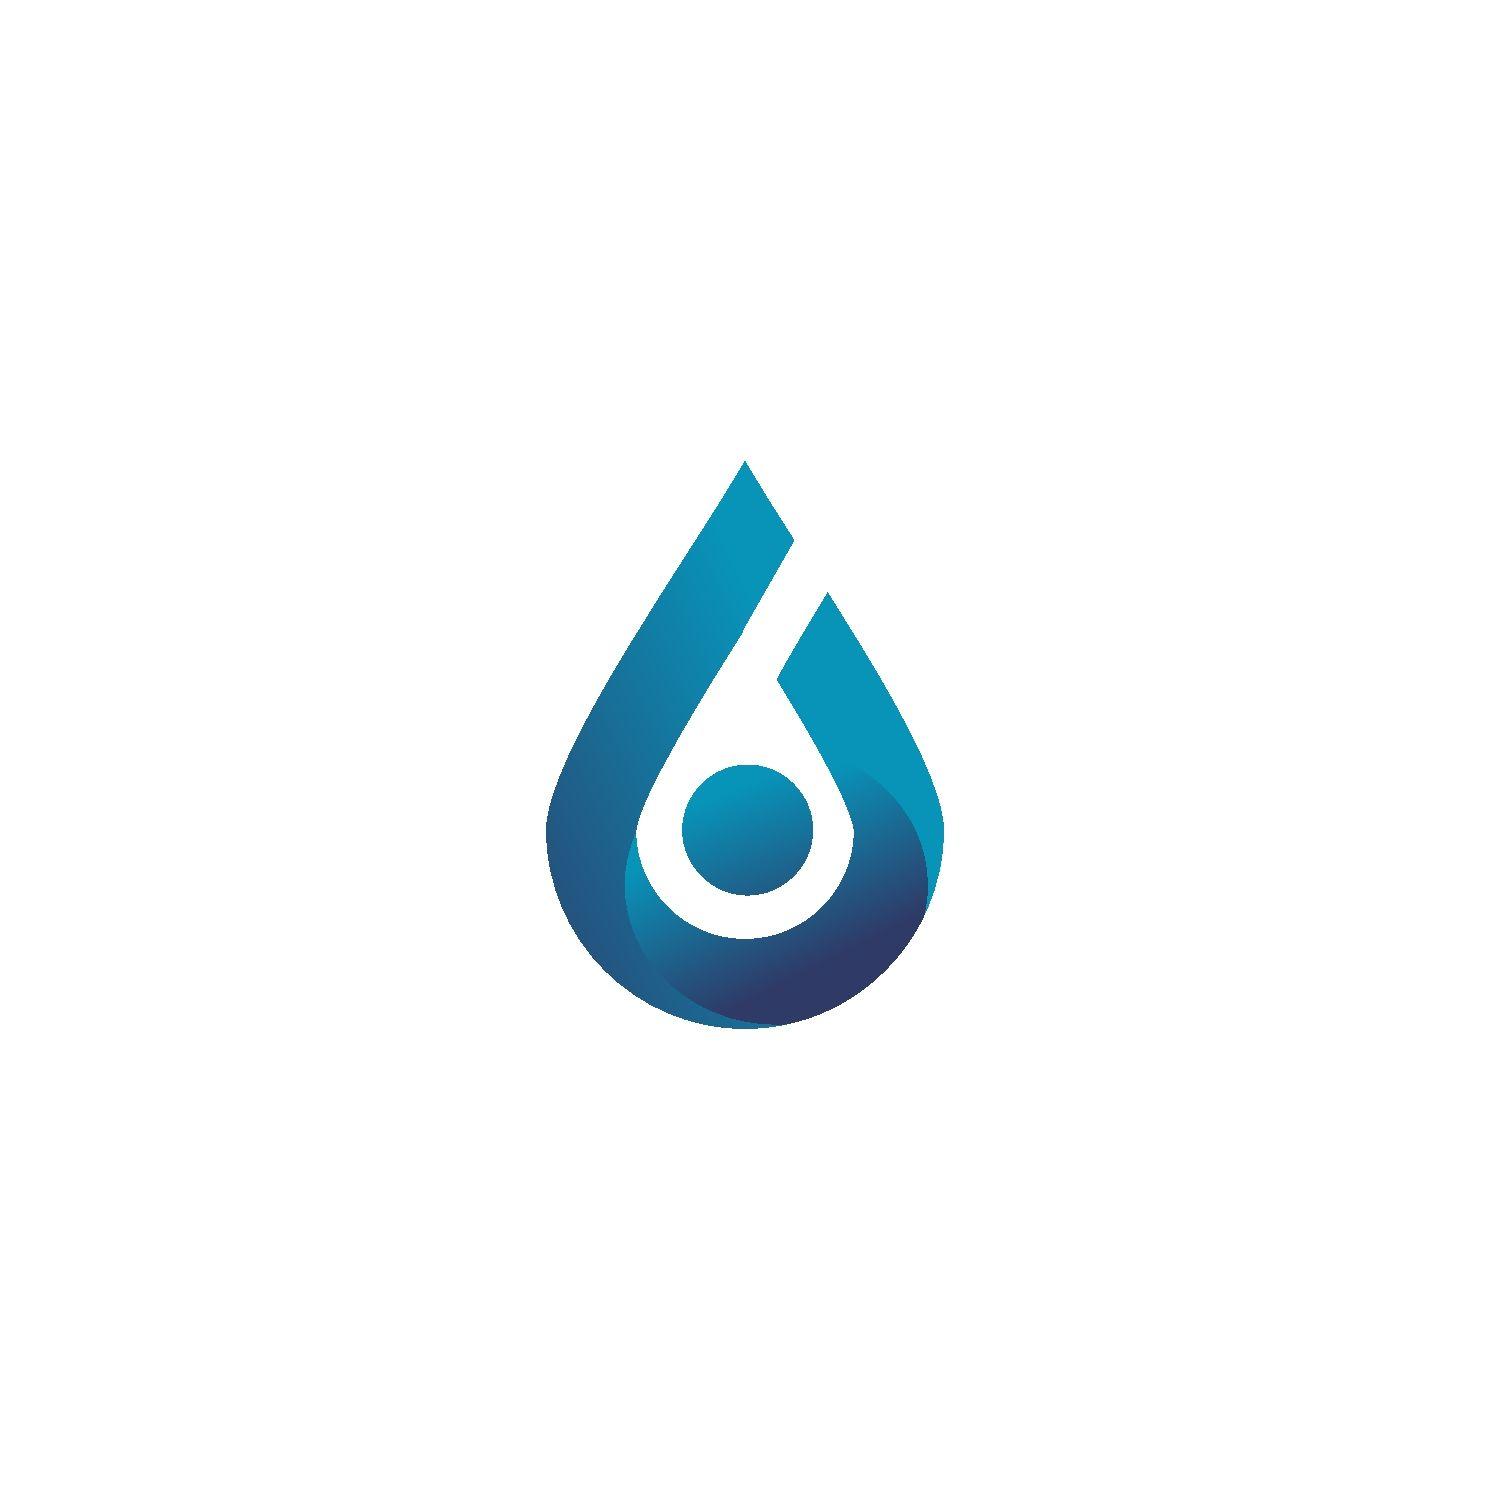 Chemical Company Logo - Traditional, Feminine, Chemical Product Logo Design for no text by ...